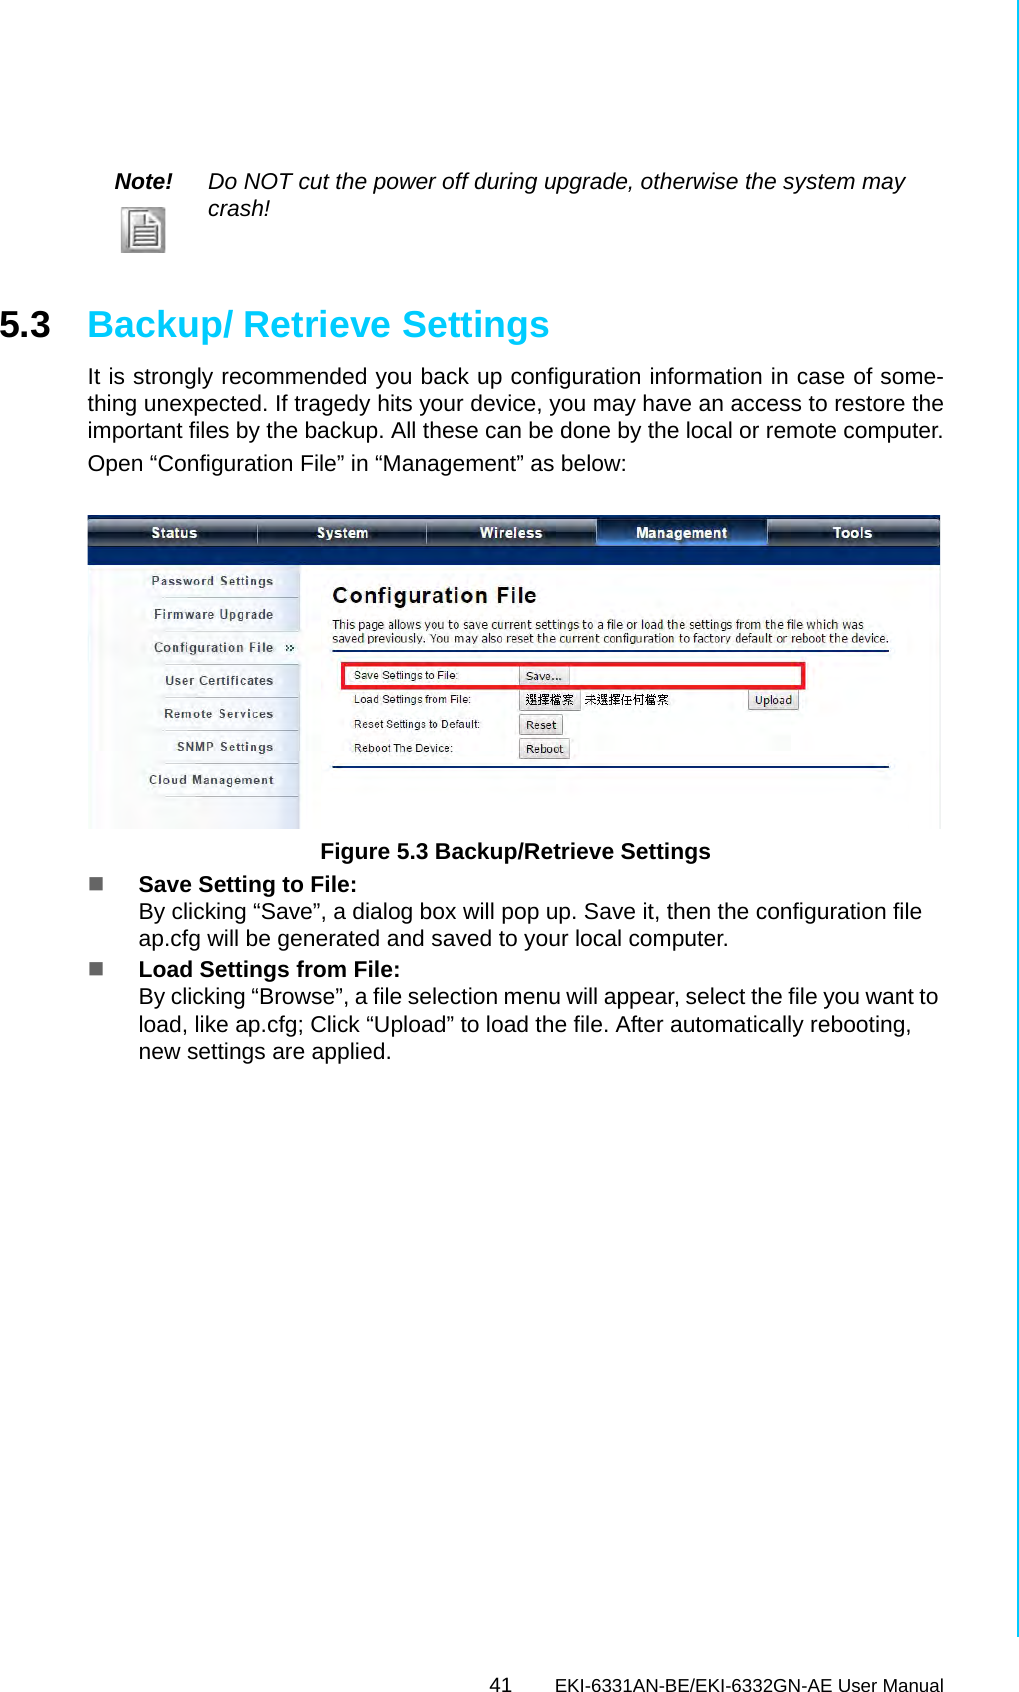 41 EKI-6331AN-BE/EKI-6332GN-AE User ManualChapter 5 Management5.3 Backup/ Retrieve SettingsIt is strongly recommended you back up configuration information in case of some-thing unexpected. If tragedy hits your device, you may have an access to restore theimportant files by the backup. All these can be done by the local or remote computer.Open “Configuration File” in “Management” as below: Figure 5.3 Backup/Retrieve SettingsSave Setting to File:By clicking “Save”, a dialog box will pop up. Save it, then the configuration file ap.cfg will be generated and saved to your local computer.Load Settings from File:By clicking “Browse”, a file selection menu will appear, select the file you want to load, like ap.cfg; Click “Upload” to load the file. After automatically rebooting, new settings are applied.Note! Do NOT cut the power off during upgrade, otherwise the system may crash!